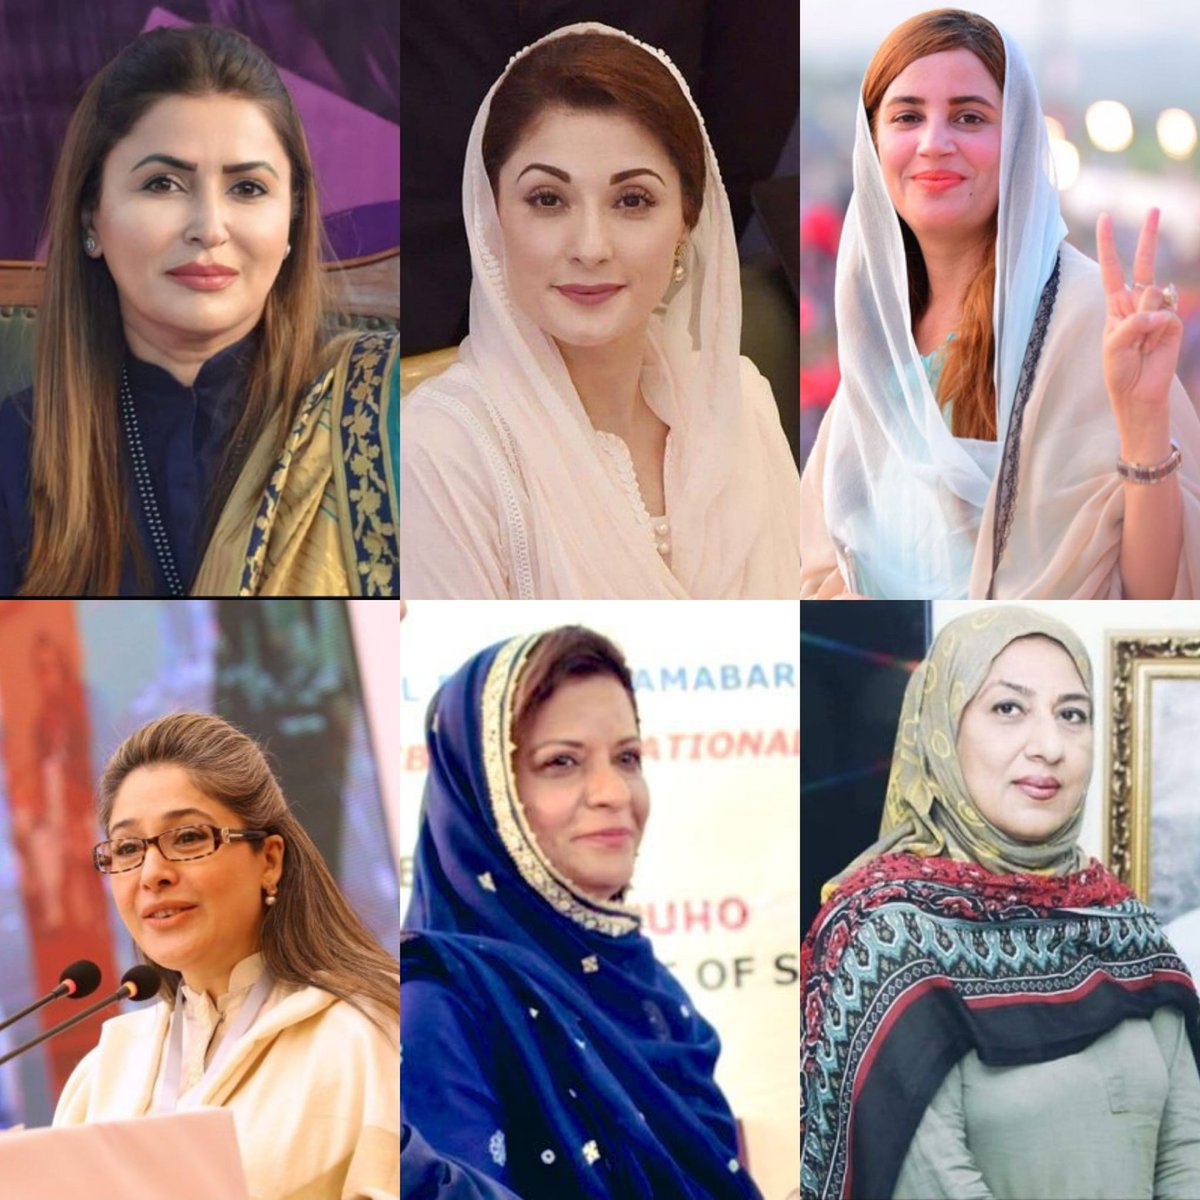 NCSW congratulates the 27 remarkable women candidates who emerged victorious in the 8th February polls—11 more than in 2018. Their triumph promises a brighter future for our assemblies, with a renewed emphasis on women’s rights & concrete actions toward gender equality.